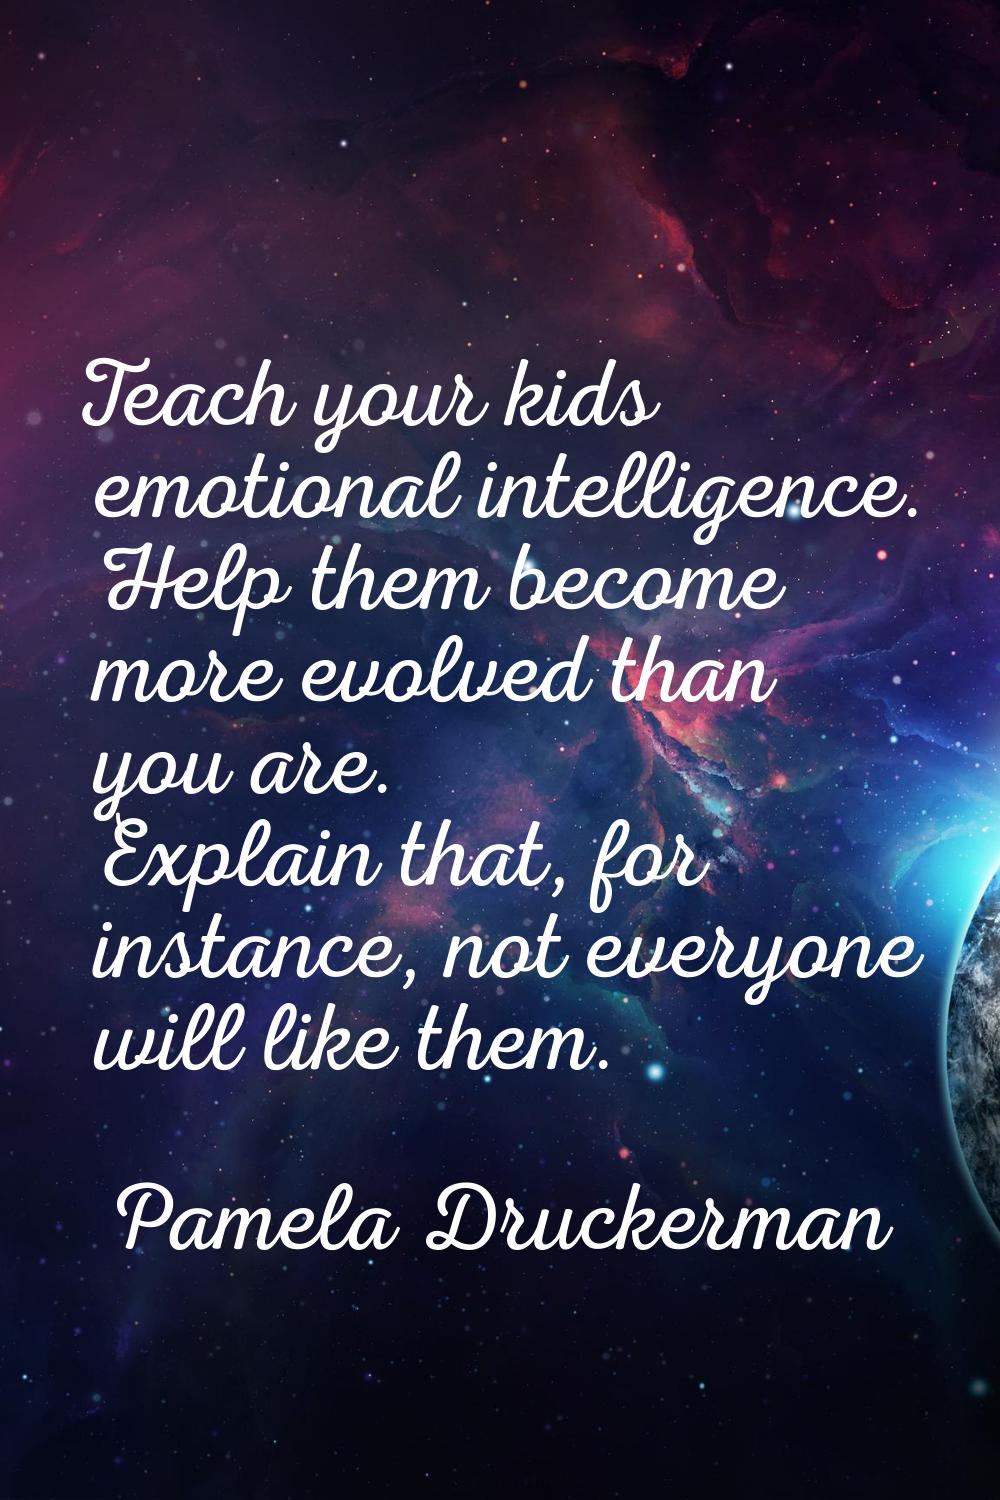 Teach your kids emotional intelligence. Help them become more evolved than you are. Explain that, f